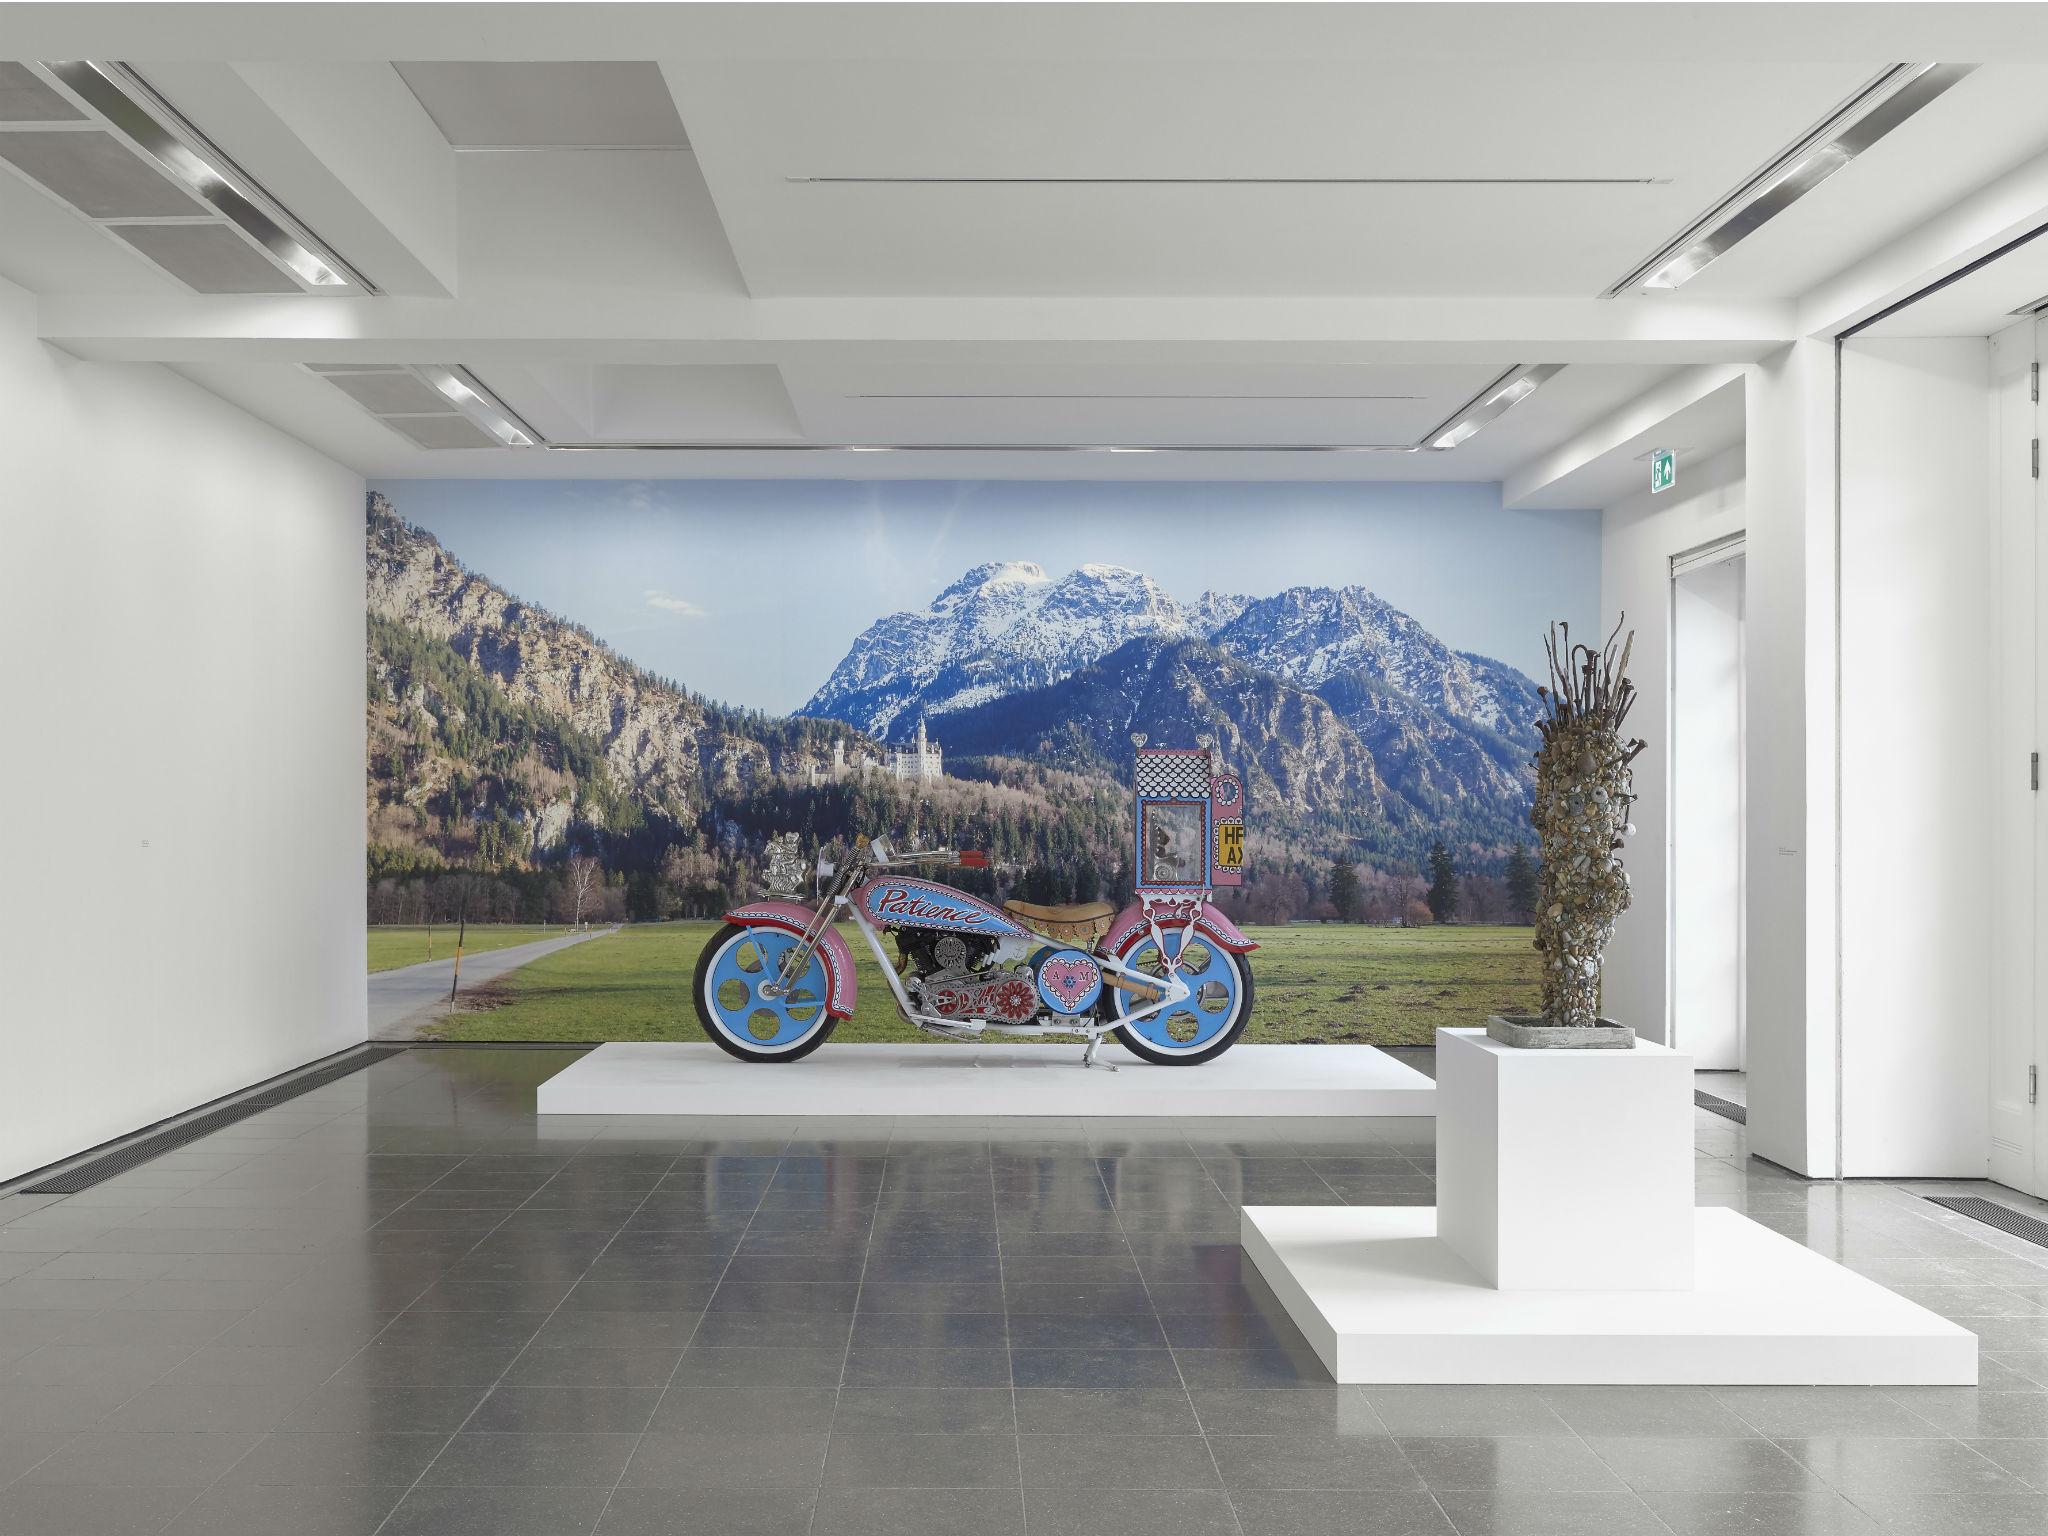 Grayson Perry, Installation view, Serpentine Gallery, London